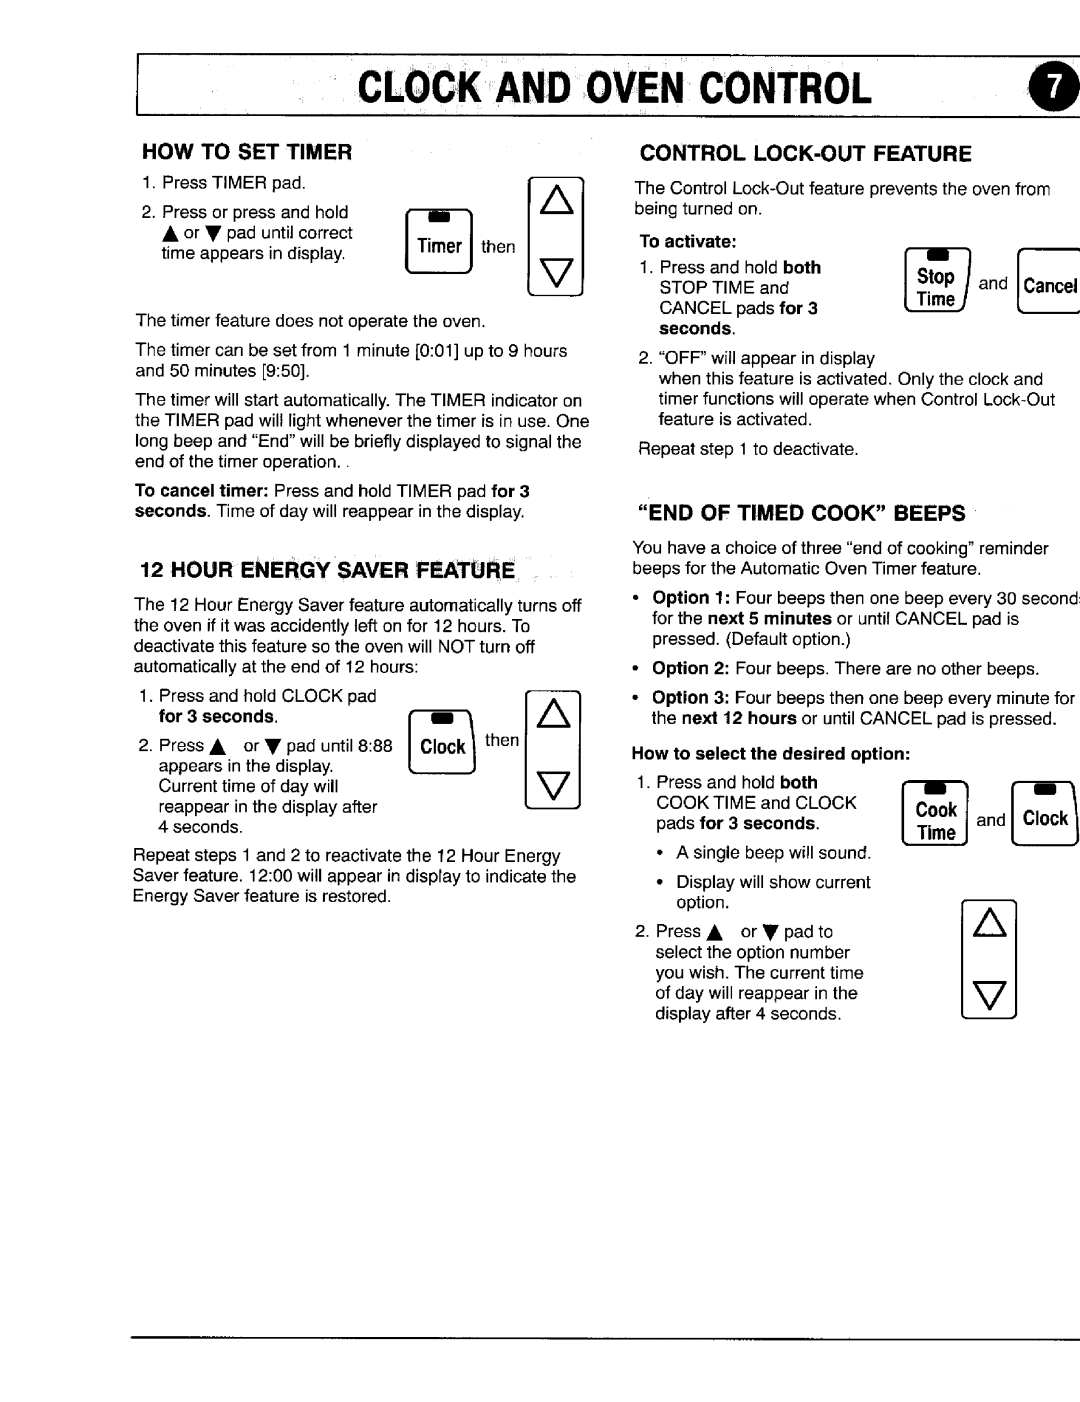 Maytag 8111P375-60 COOec,o, How To Set Timer, Control Lock-Outfeature, End Of Timed Cook Beeps 